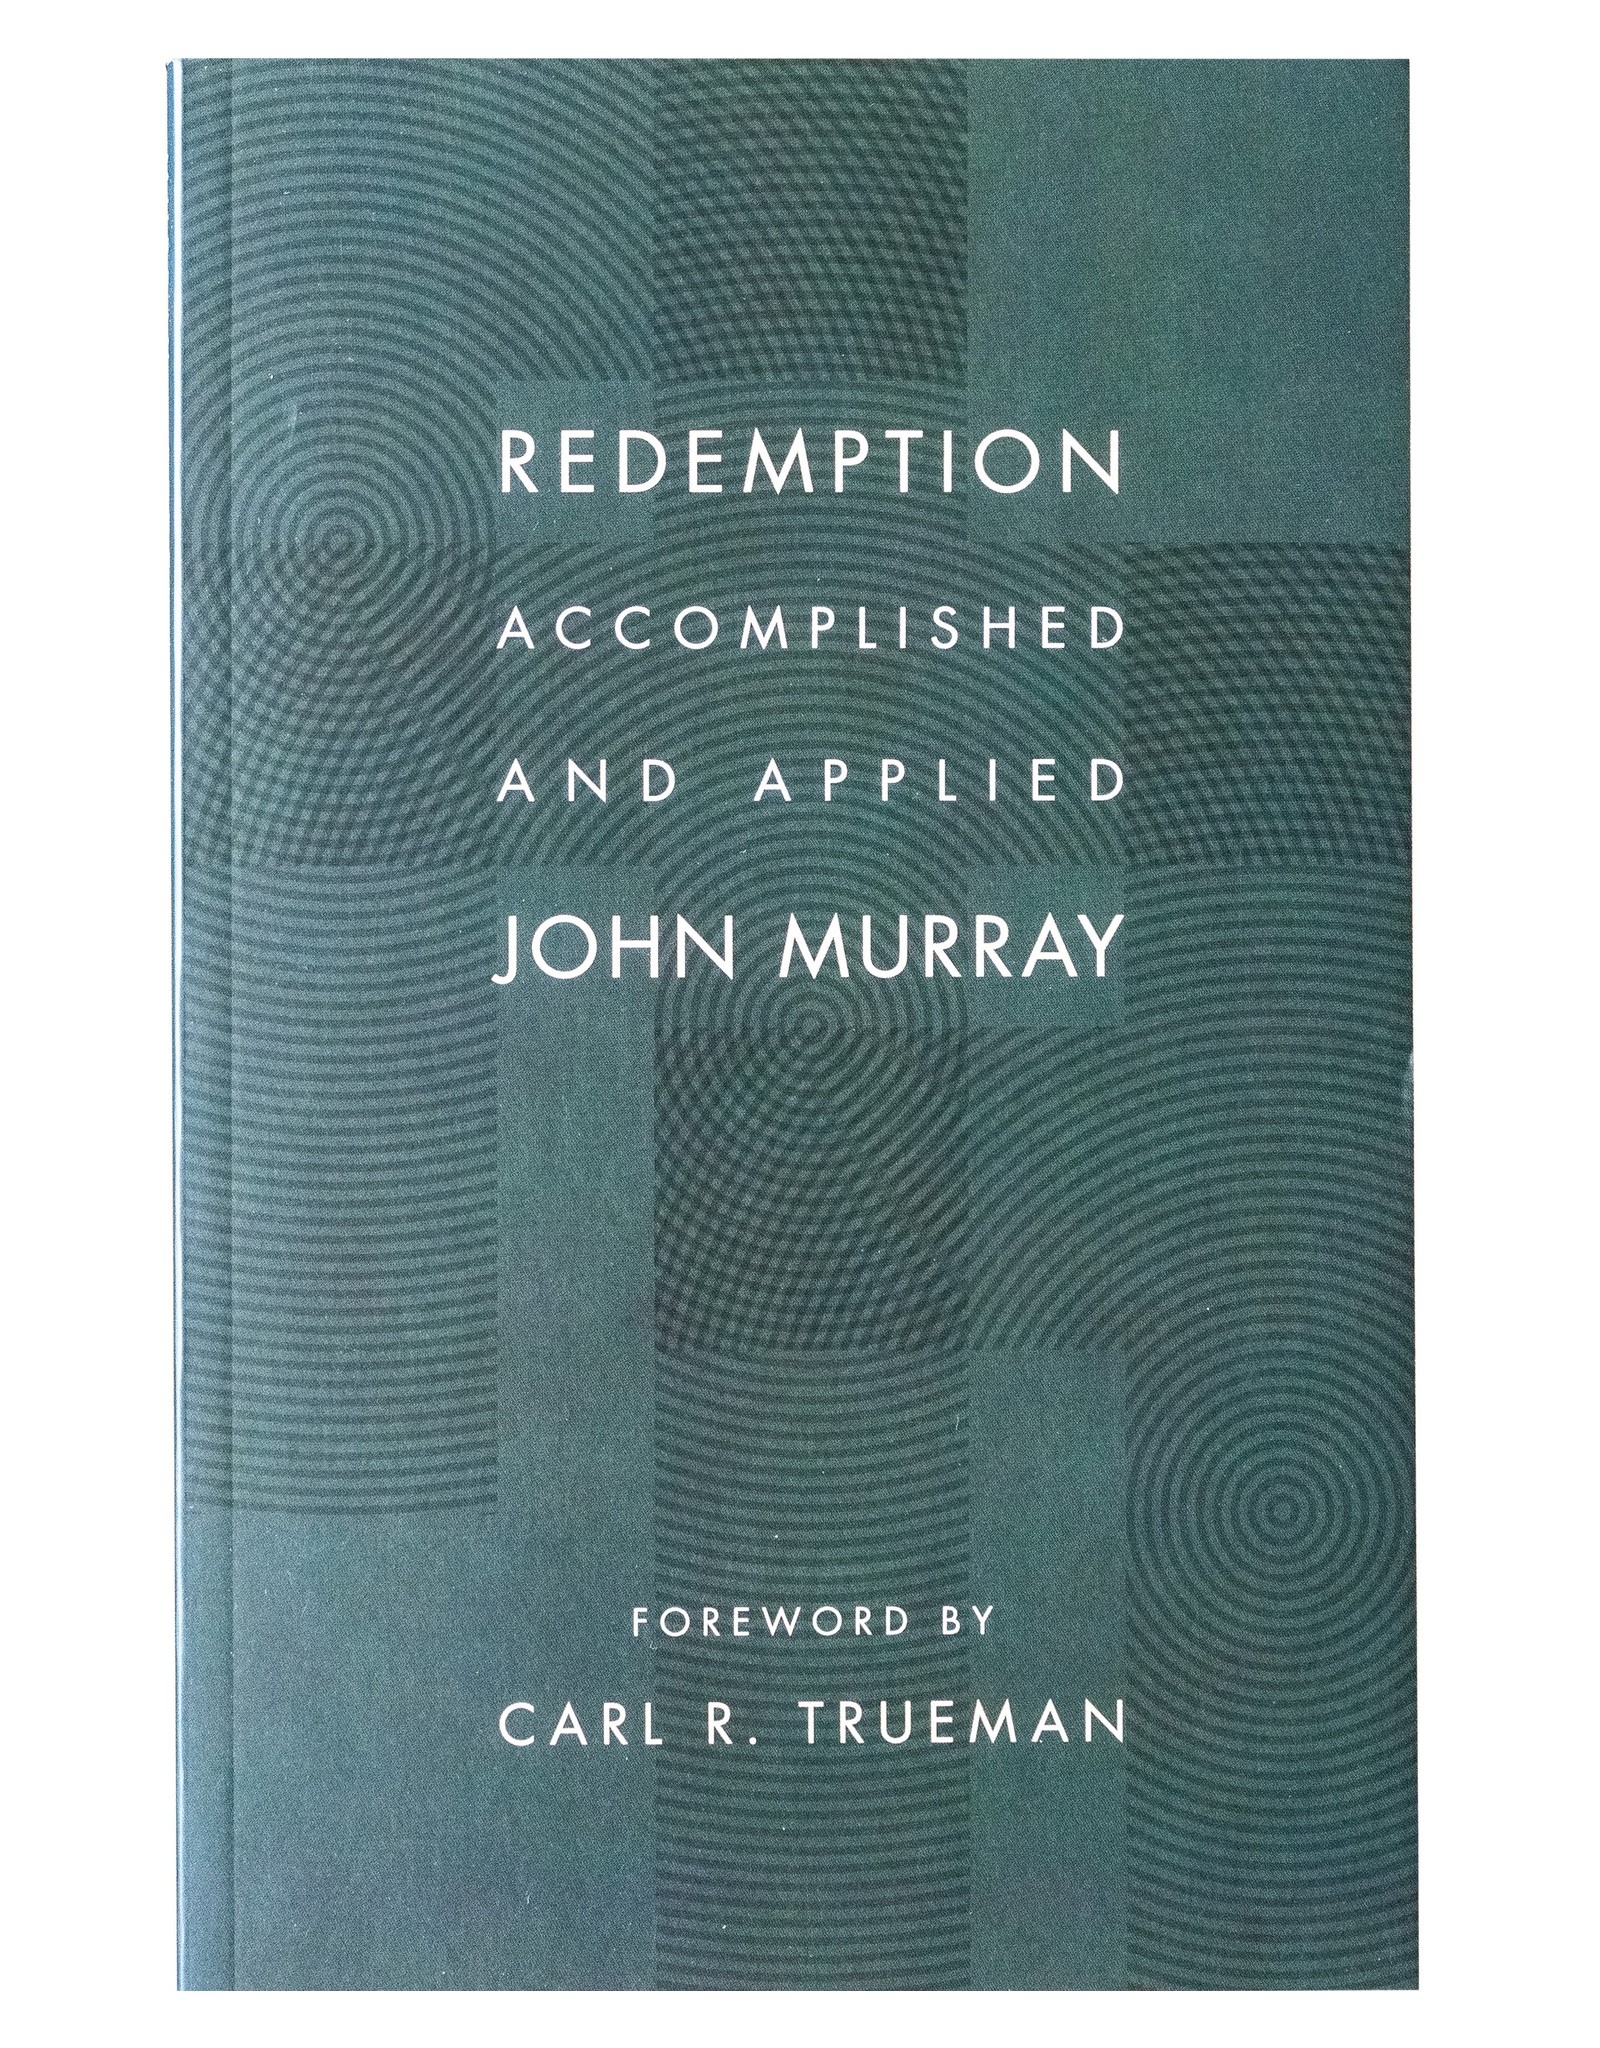 Wm. B. Eerdmans Redemption Accomplished and Applied